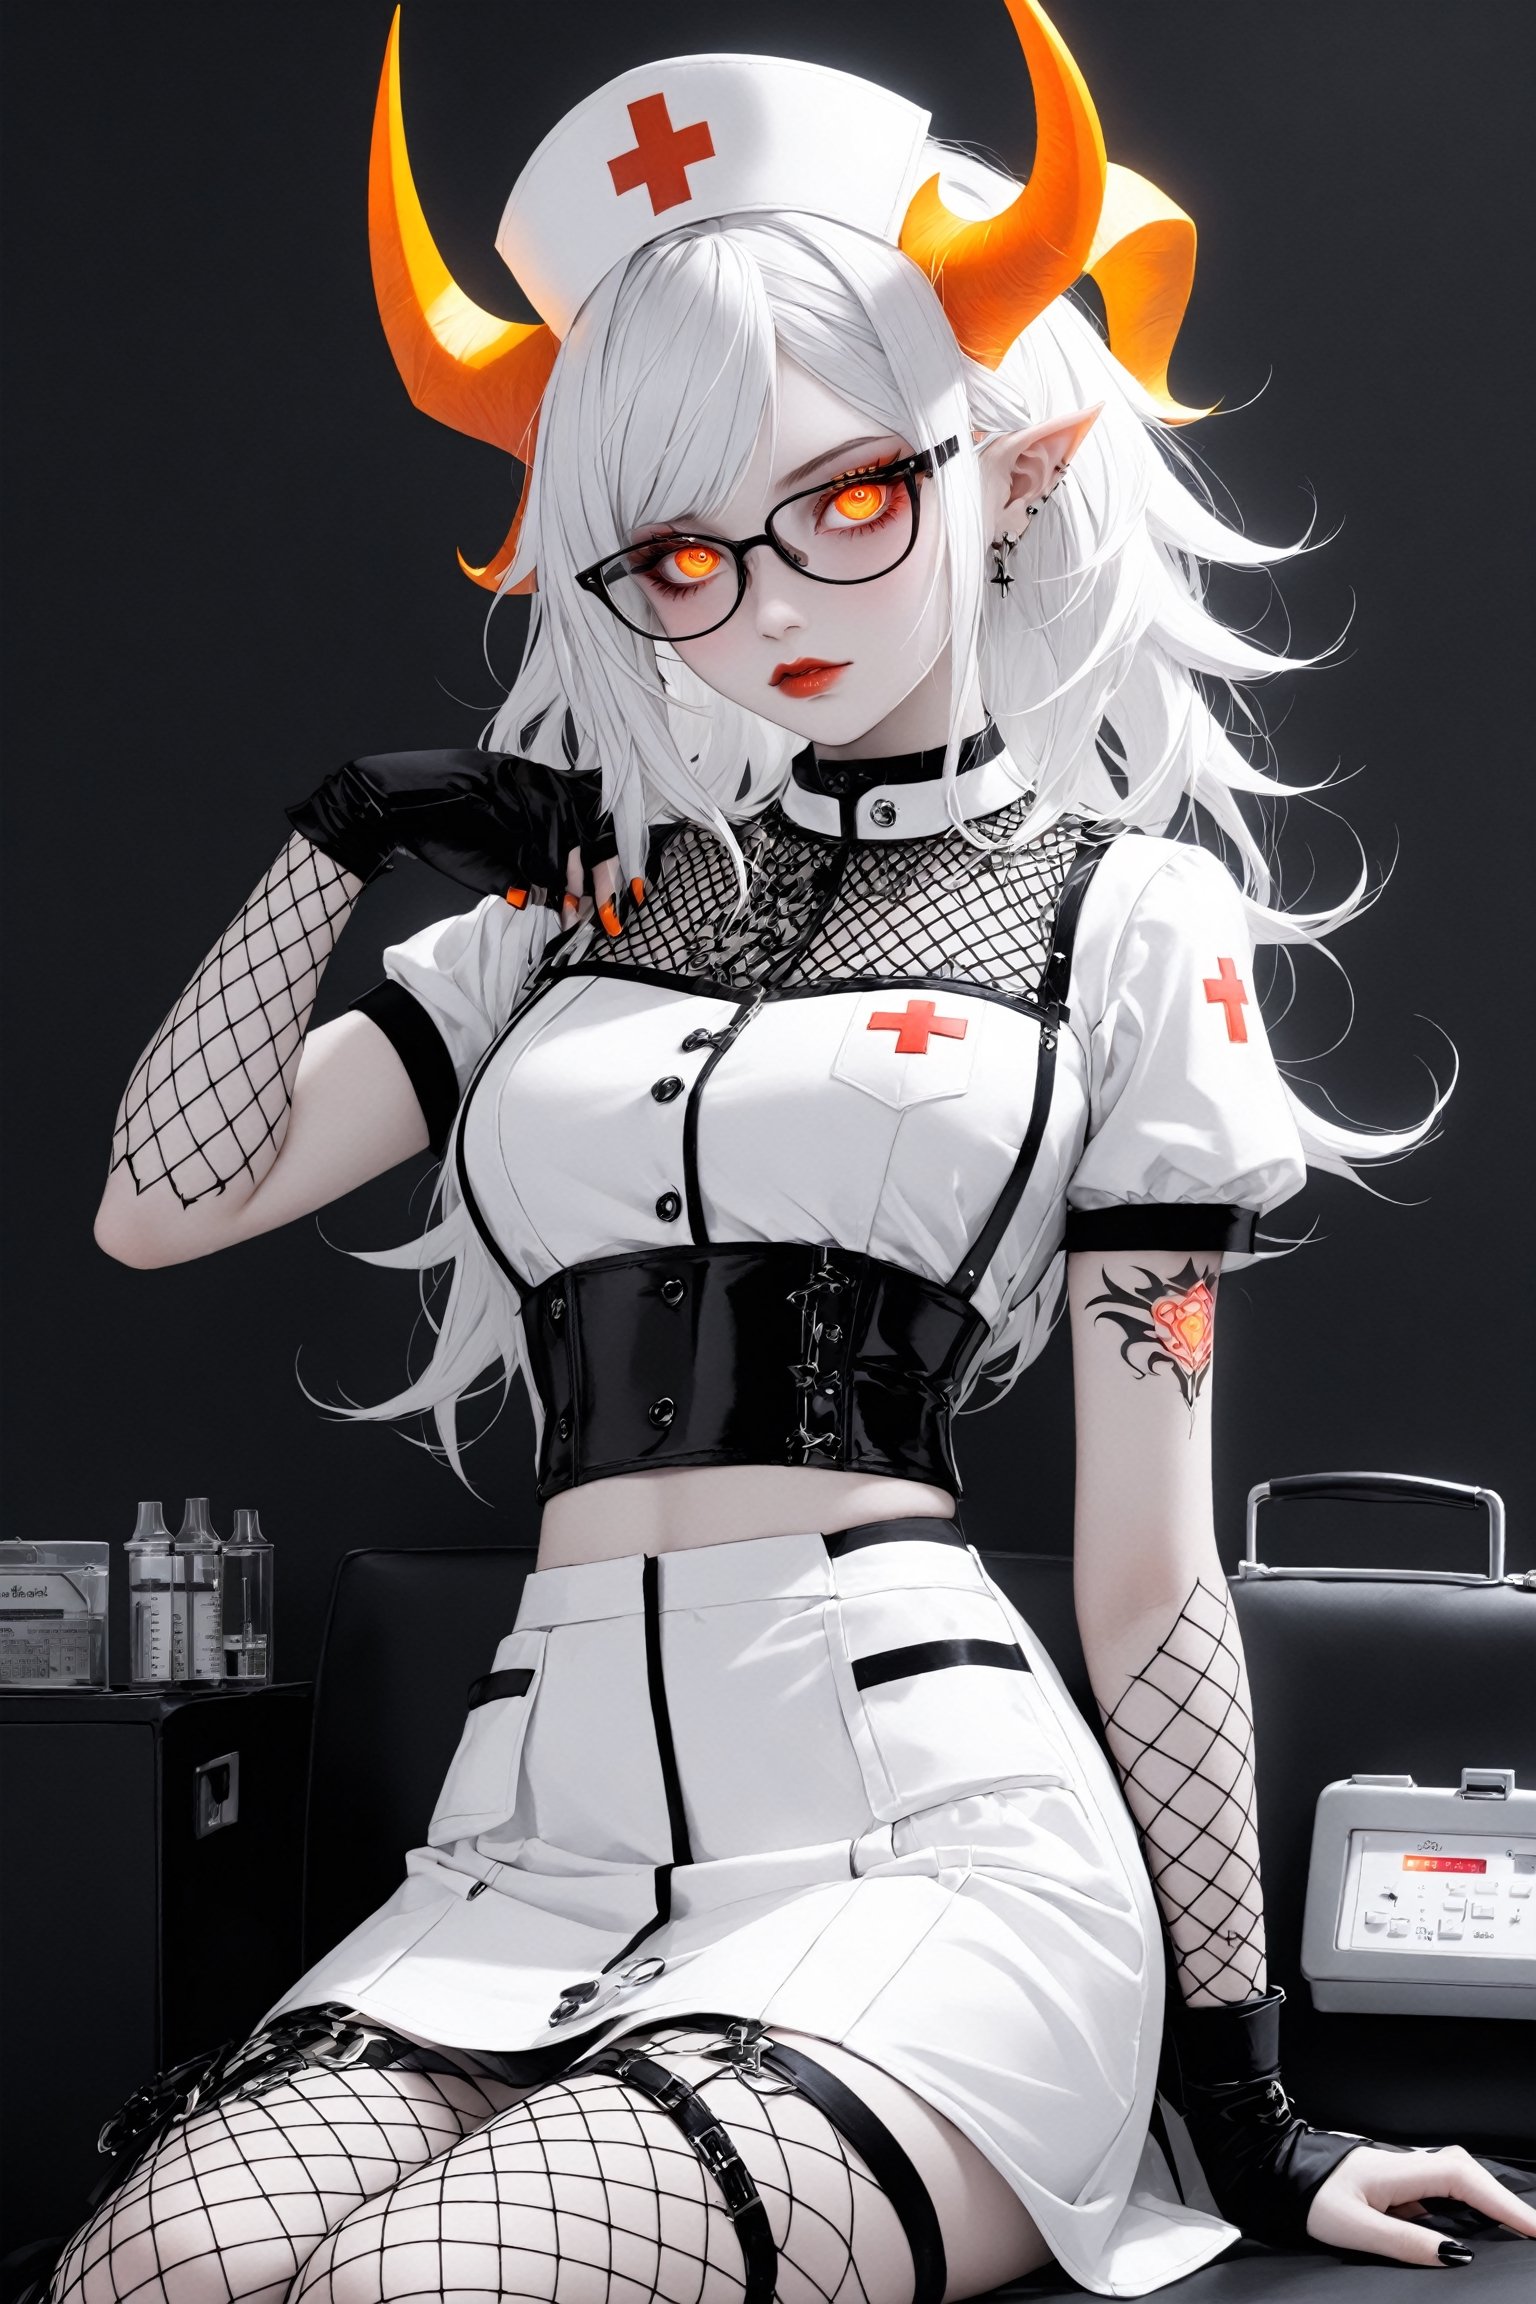 1 girl, albino demon girl, with lethargic sleepy smokey eyes,white eyelashes,((orange slit pupil eyes)),nurse cap,mesh fishnet blouse,pure White long dress, (long intricate horns:1.2) ,(midriff-baring outfit),
Goth tattoos,gothic-emo theme, she is characterized by her unique fashion sense,((Her uniform is white)), black-rimmed glasses, with deep purple and crimson accents,((syringe in her hand:1.2 )), a lace-up corset at her side,Nurse suit,goth person,(womb tattoo),ACPt